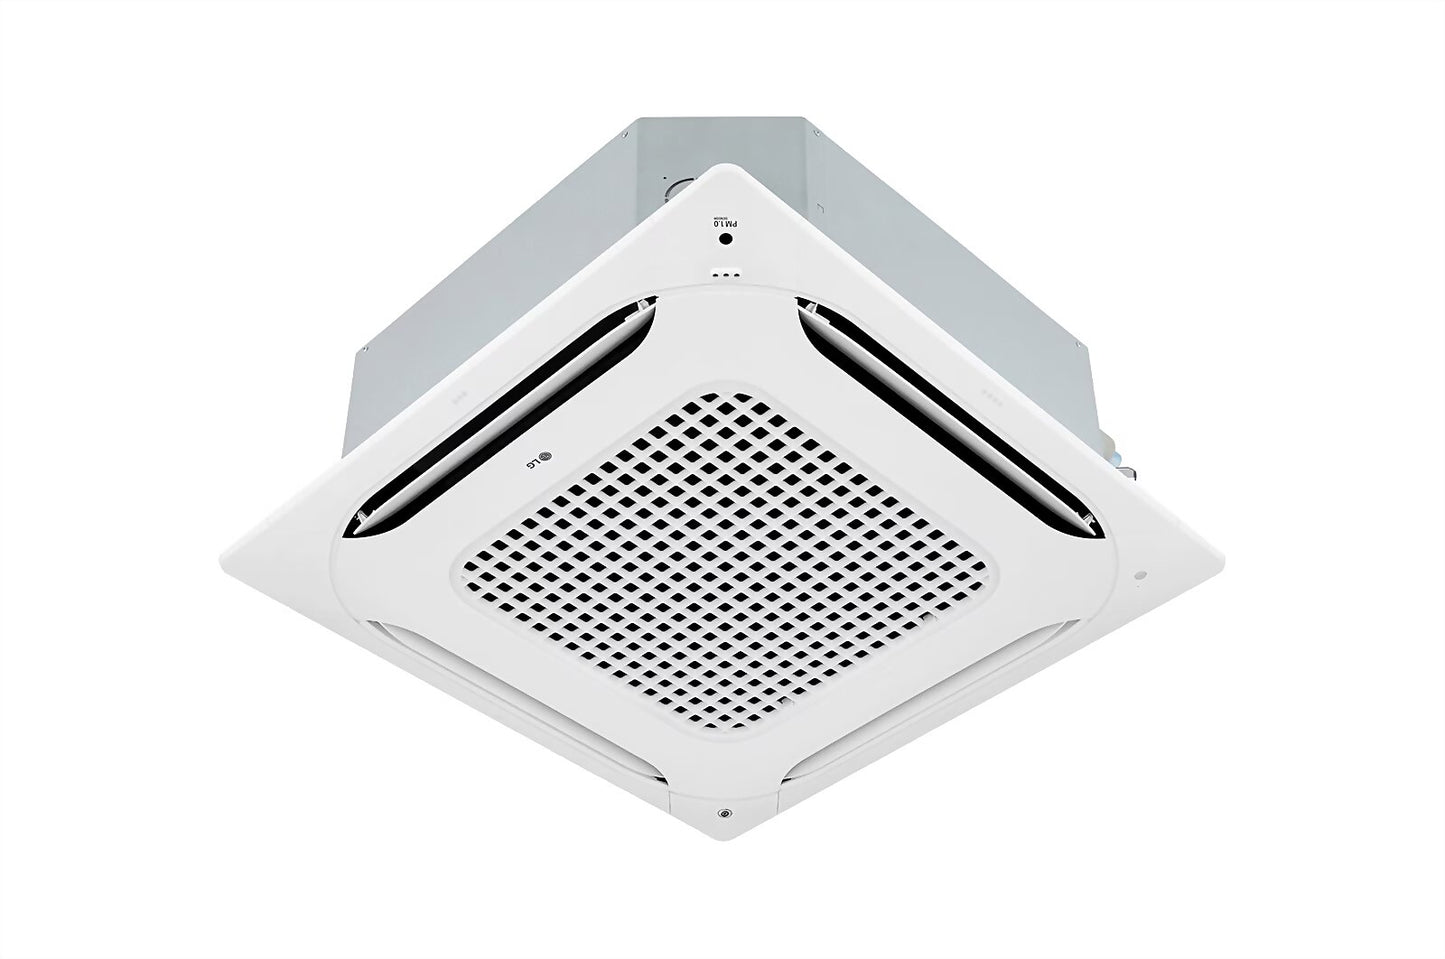 LG Ceiling Mounted 4 Way Cassette Inverter AC 4.5KW with Advanced Air Purification and Independent Vane Control - ARNU15GTQB4